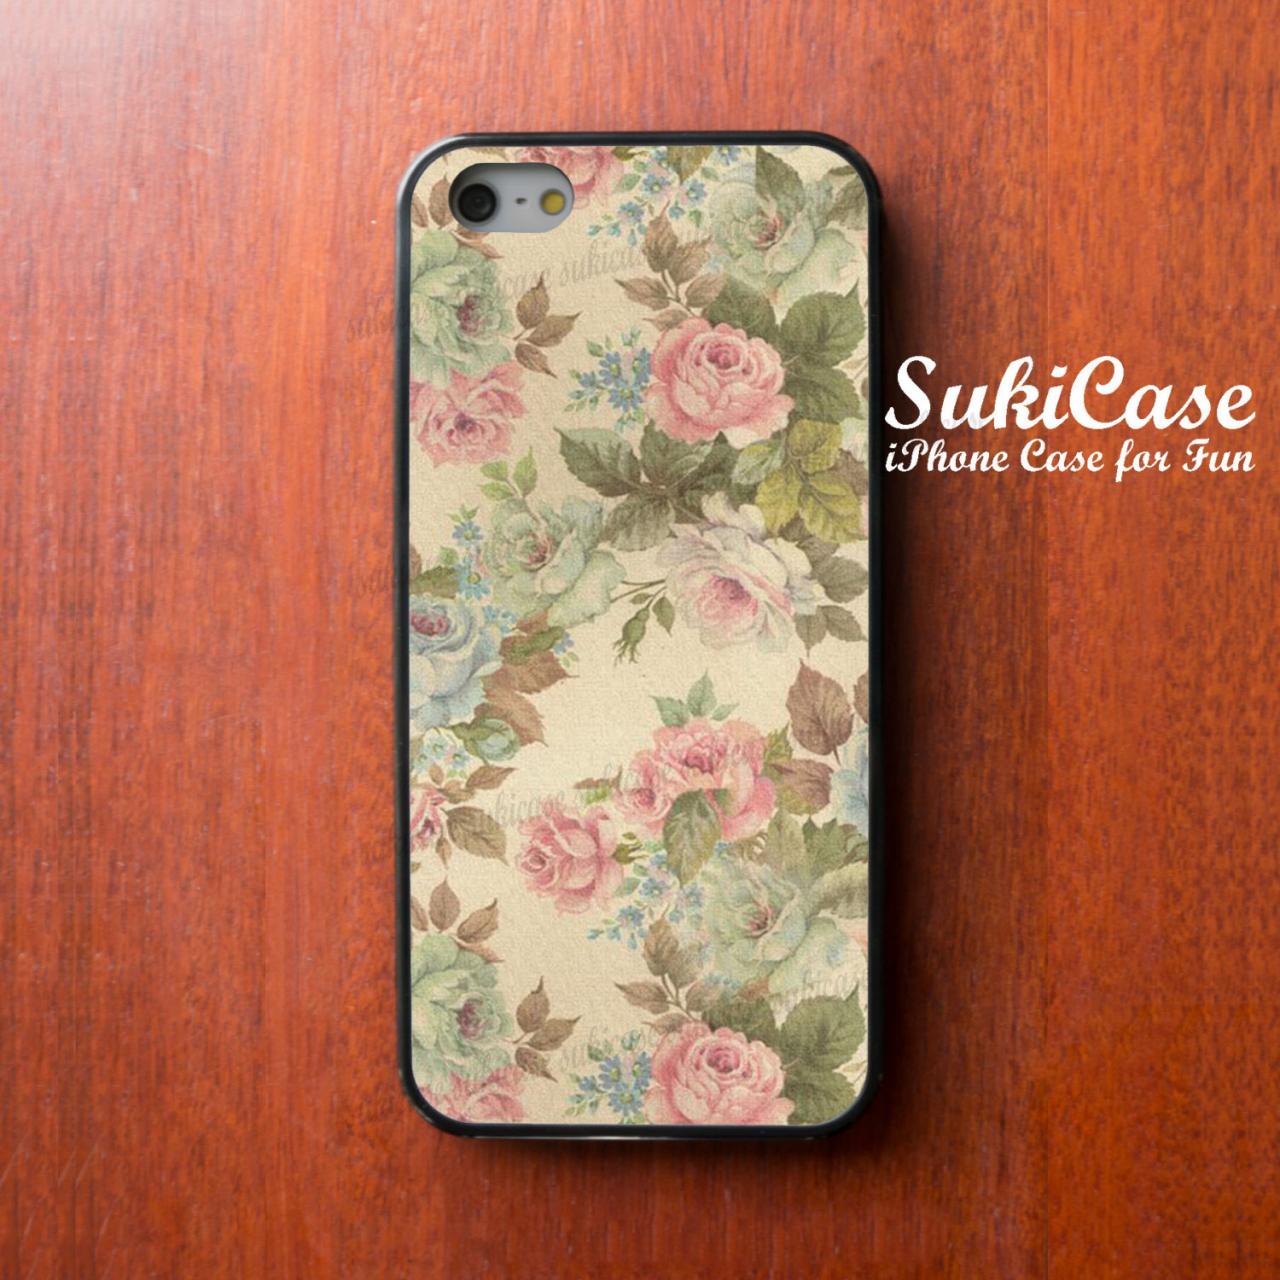 Iphone 5s Case Vintage Paint Red Rose Flower Floral Iphone Cases Iphone 5 Case Iphone 4 Case Samsung Galaxy S4 Cover Iphone 5c Iphone 4s